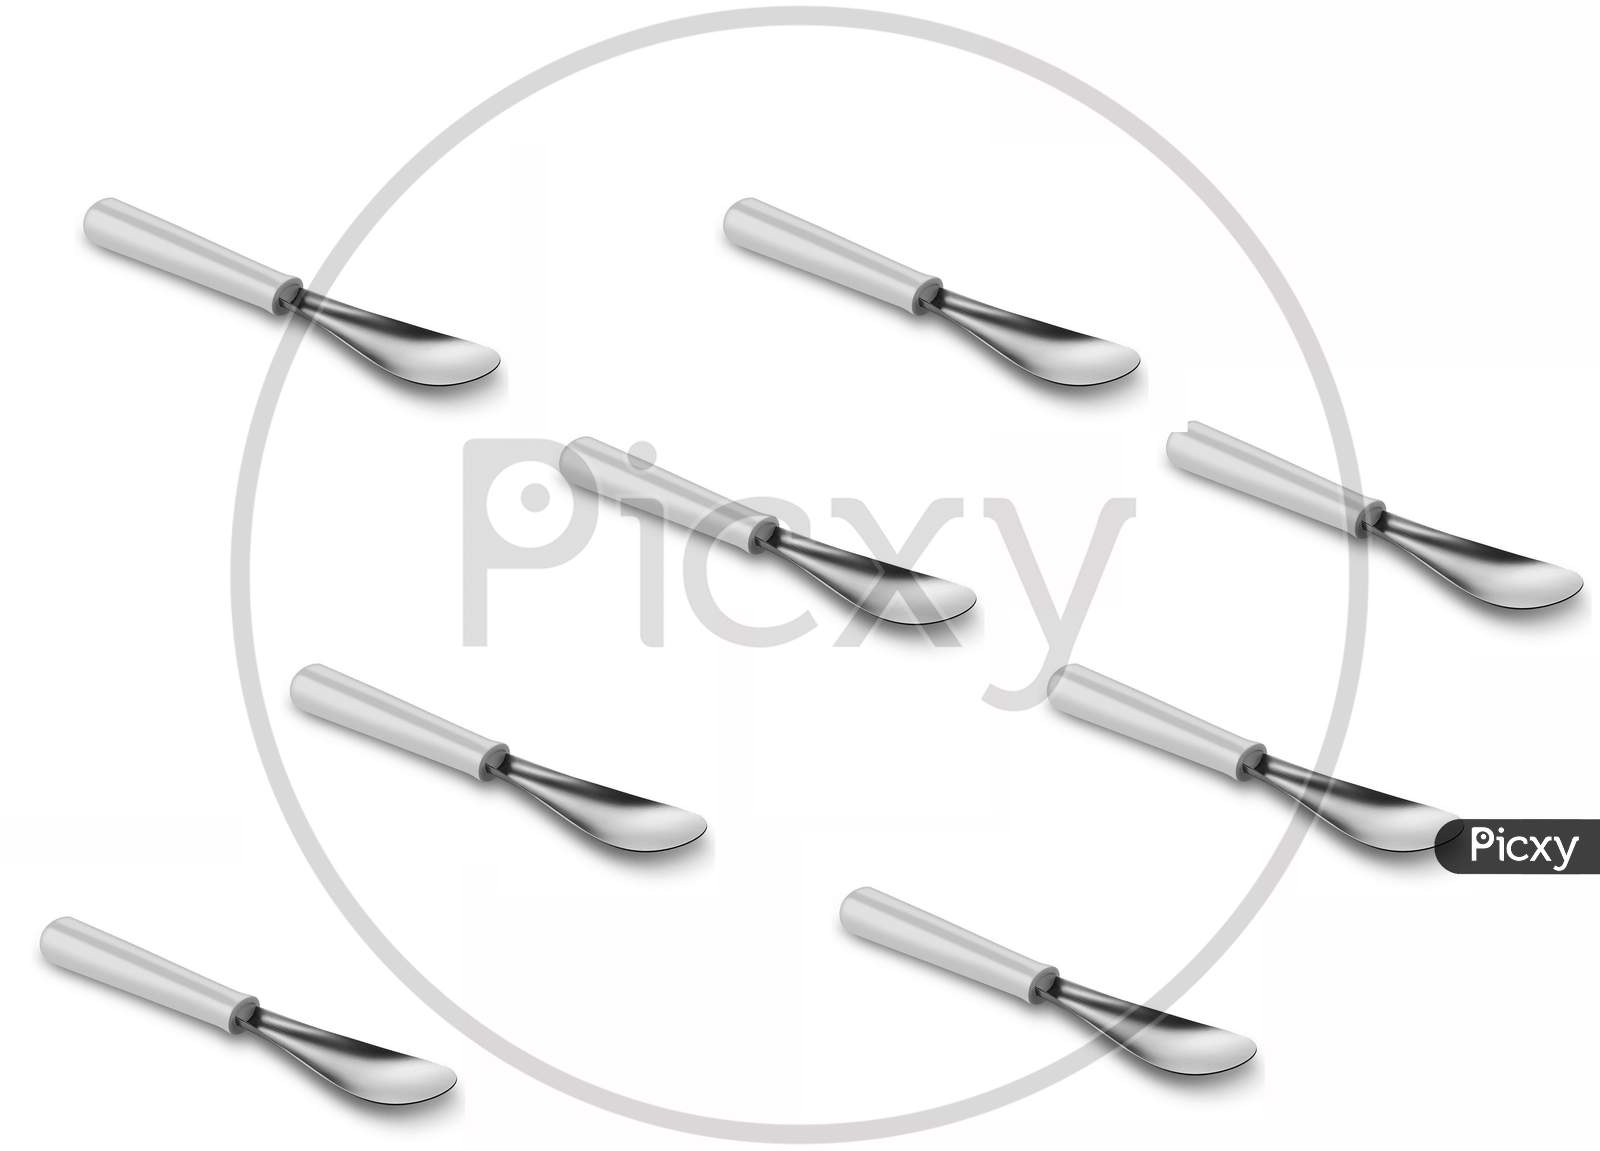 Diagonally Arranged Eight Silver Metal Cooking Spatula Isolated On A White Background